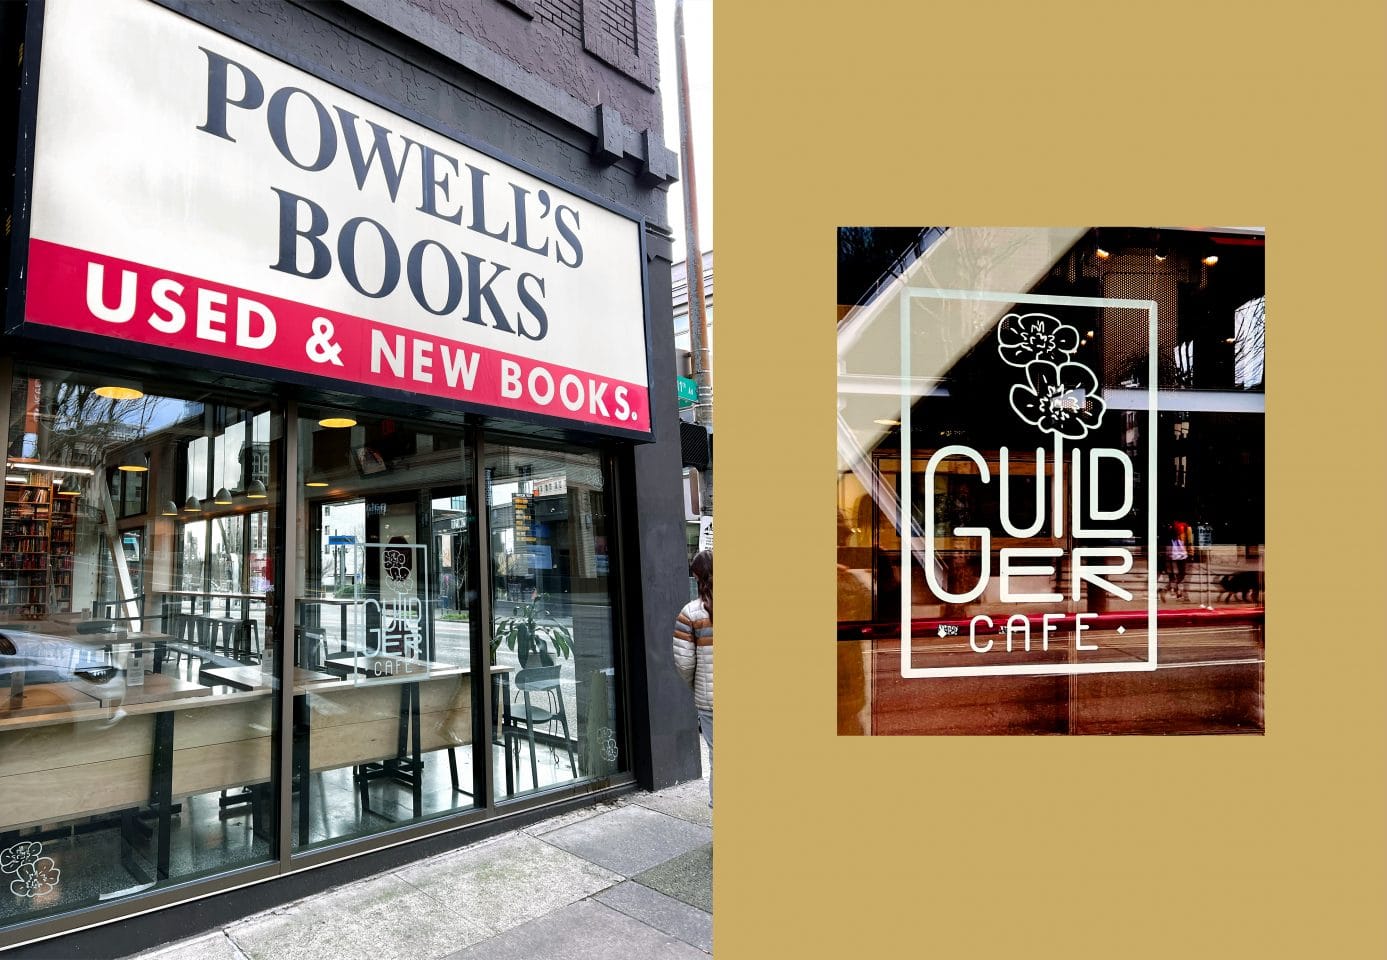 The new Guilder Cafe branding looks incredible on the Powell's Books widow downtown.